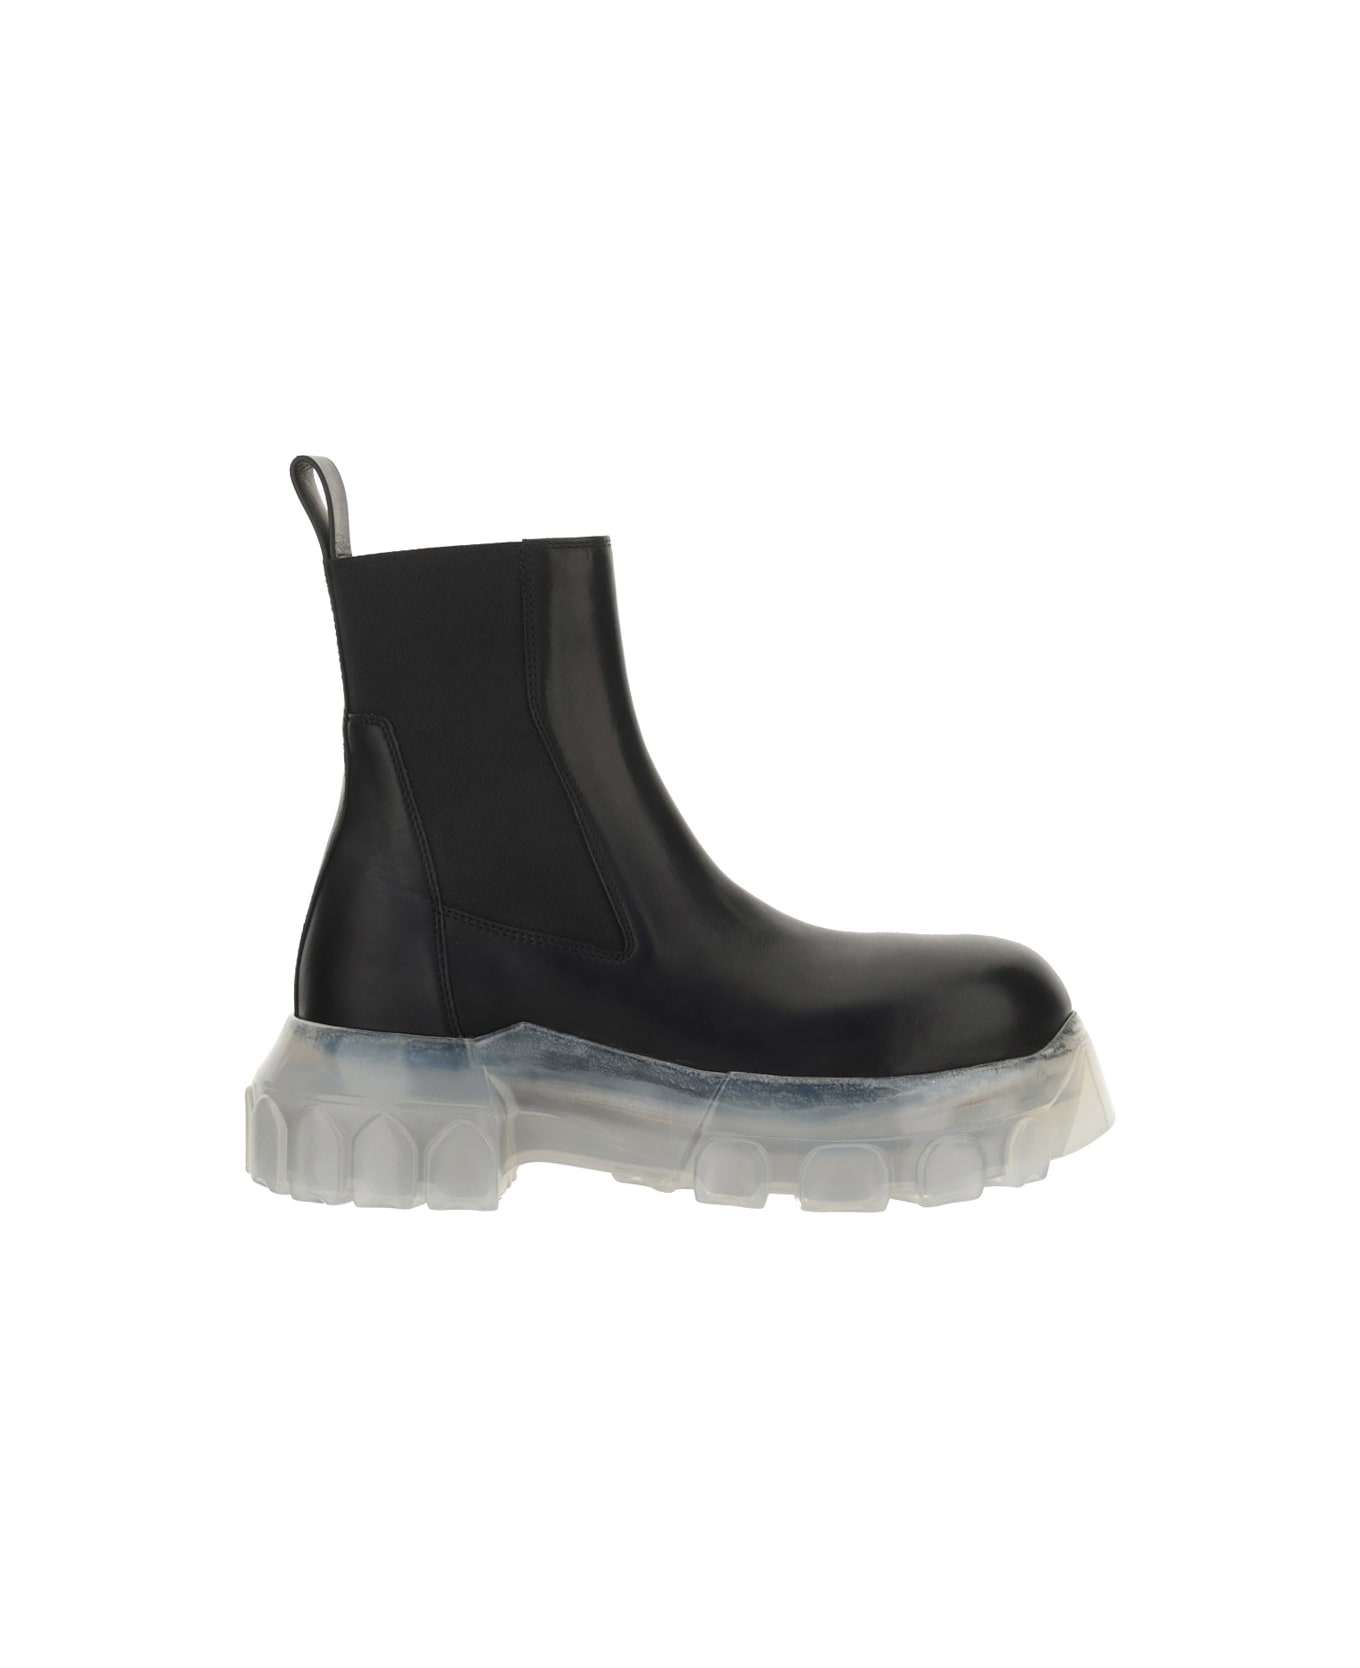 Rick Owens Boots - Black/clear